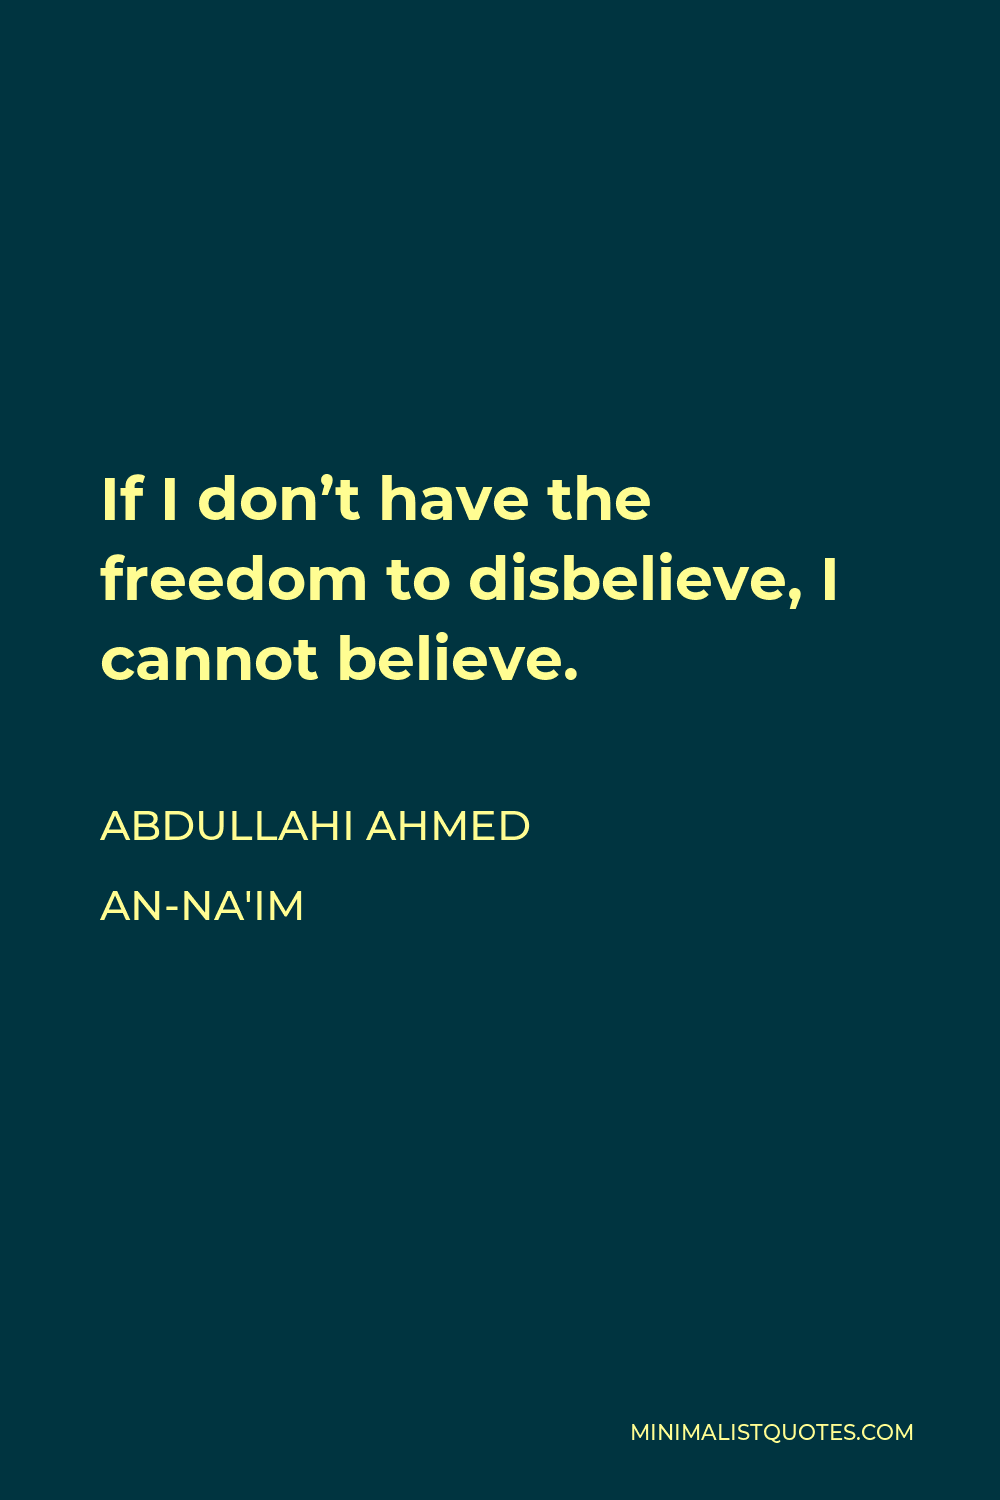 Abdullahi Ahmed An-Na'im Quote - If I don’t have the freedom to disbelieve, I cannot believe.